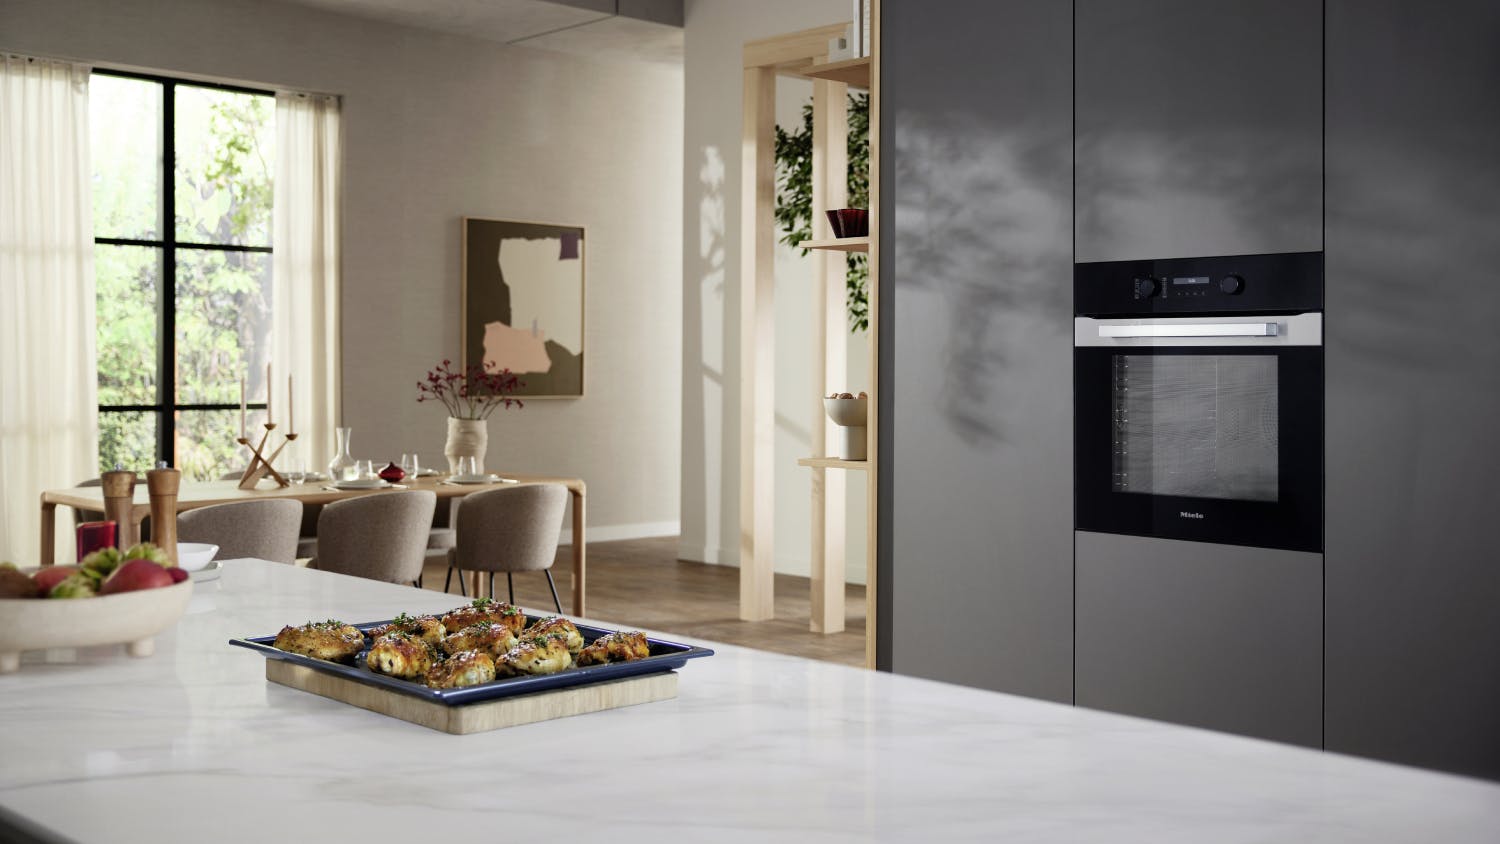 Miele 60cm 9 Function Built-In Oven - Clean Steel (H 2861 B/12174510)